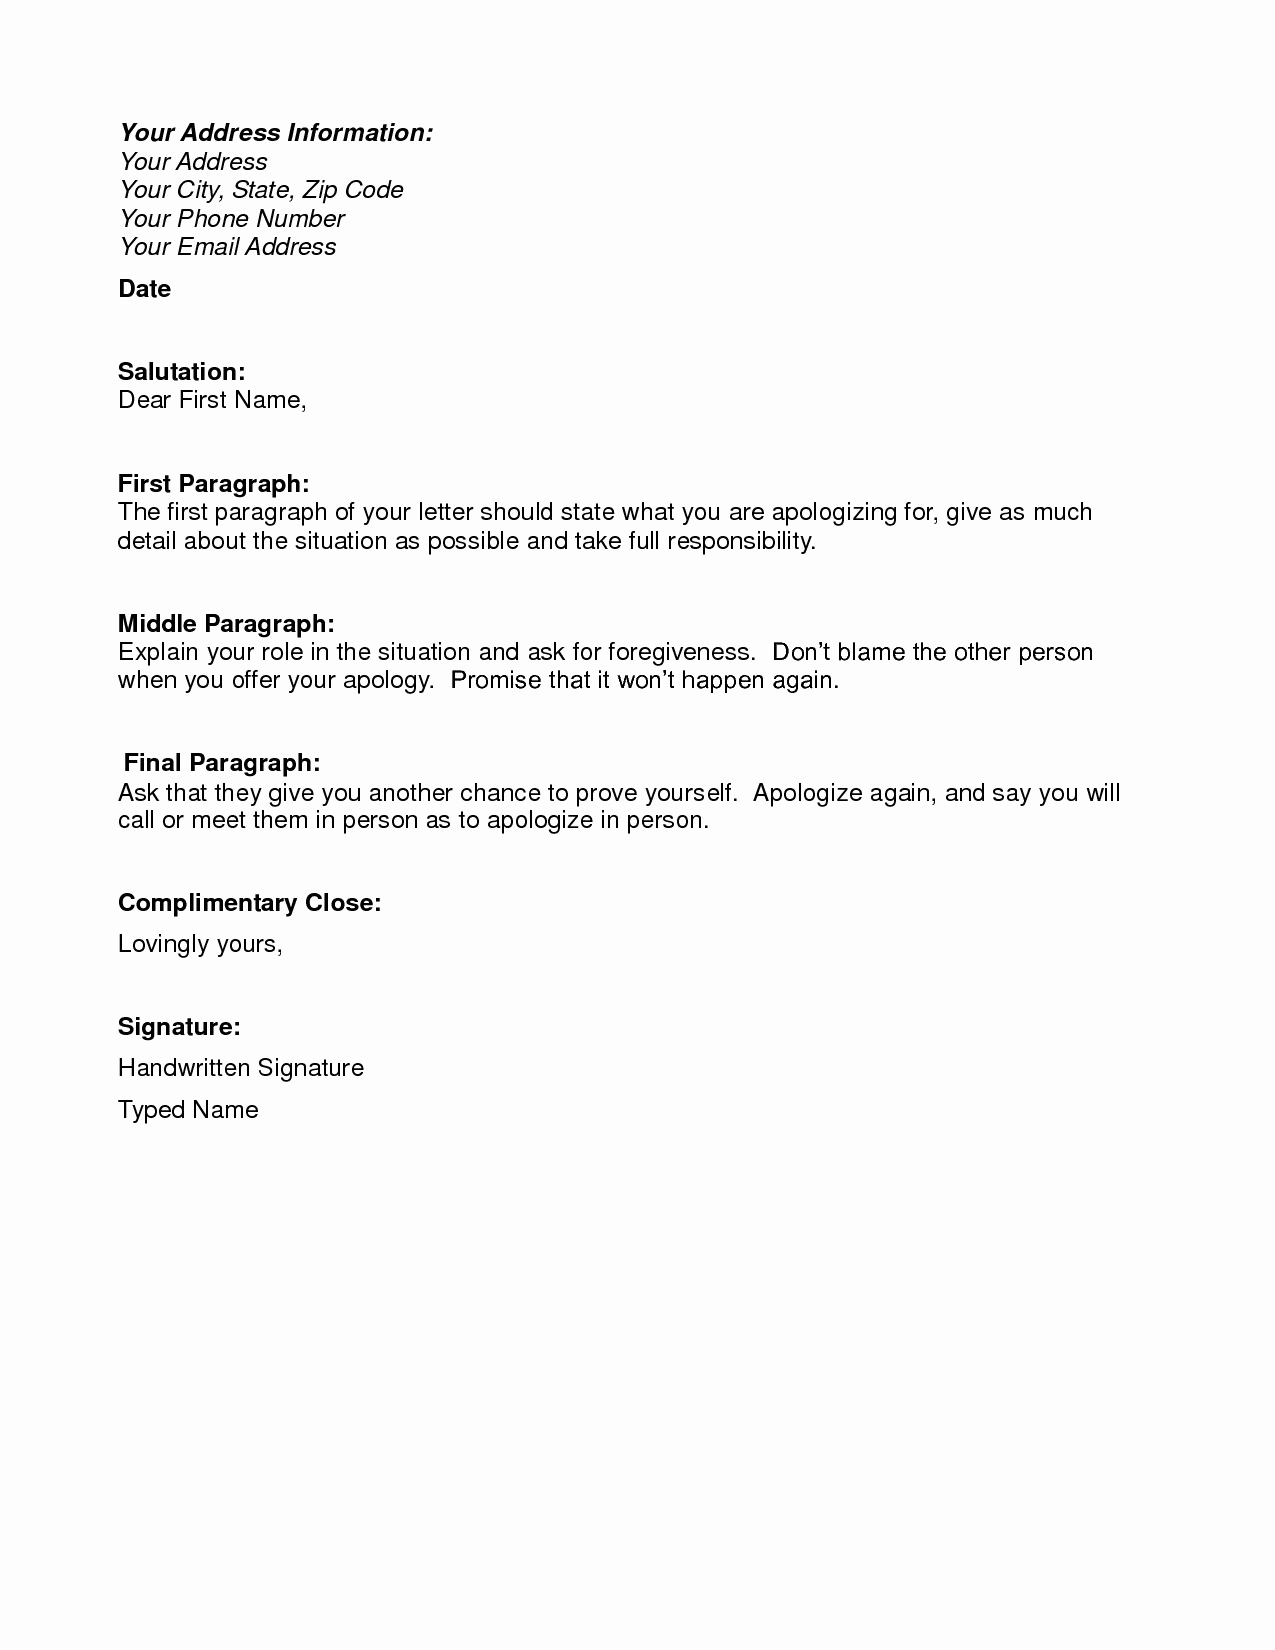 Letter for Donations for Fundraiser Template - Letter asking for Donations Template Best New Letter Template for